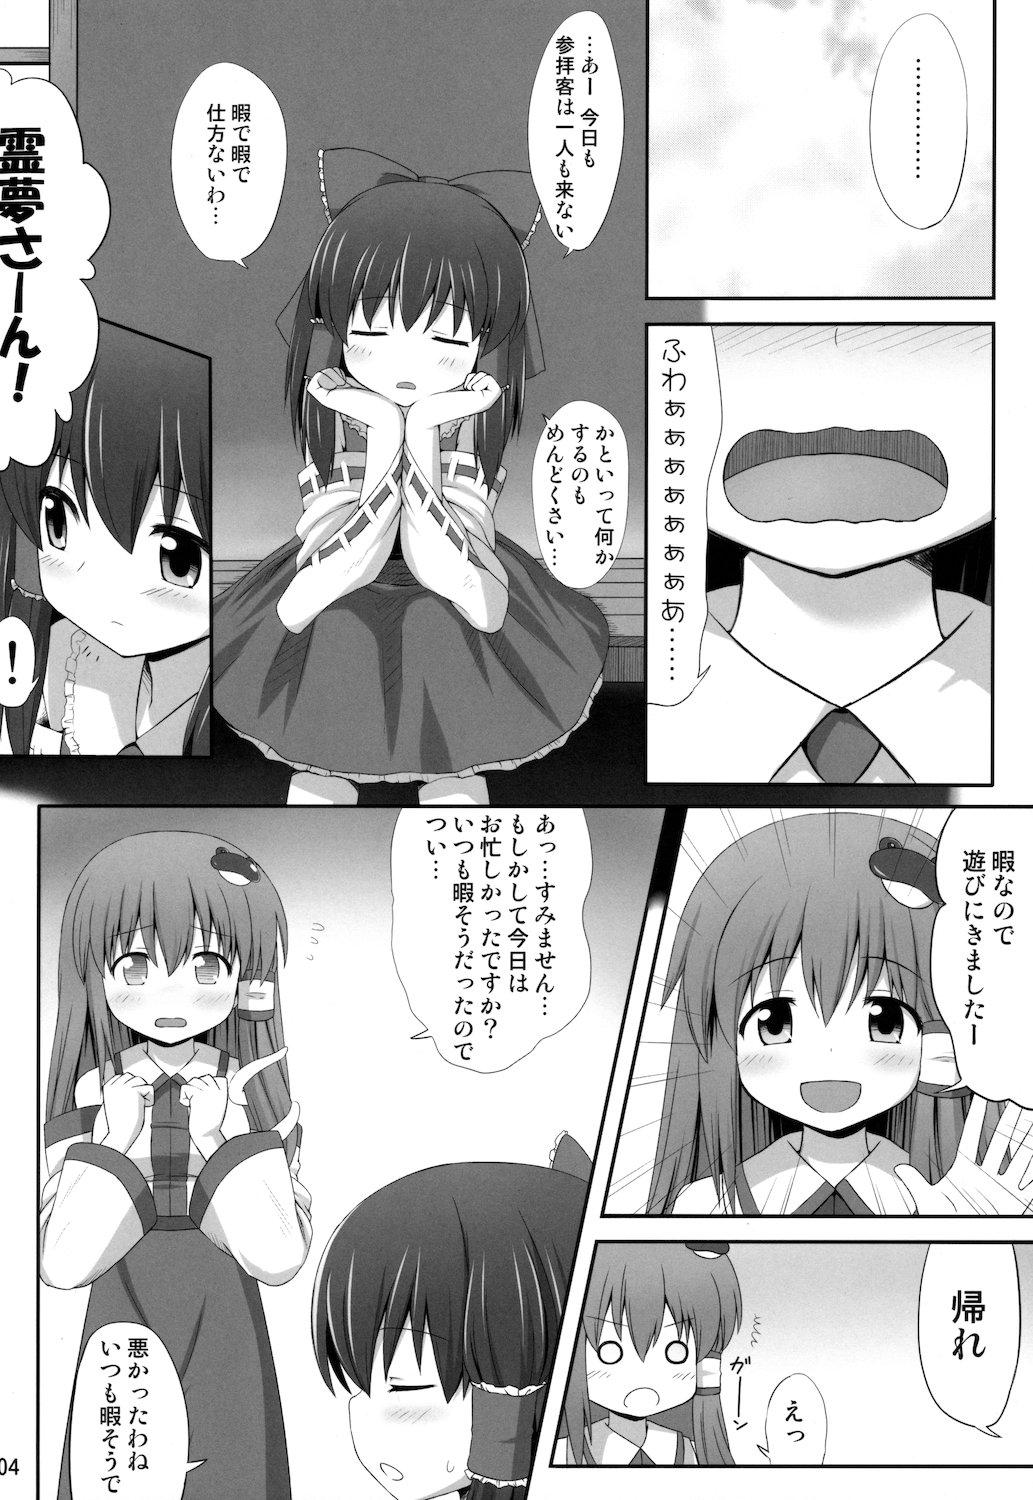 Free 18 Year Old Porn Inyoku no Miko - Touhou project Culo Grande - Page 4